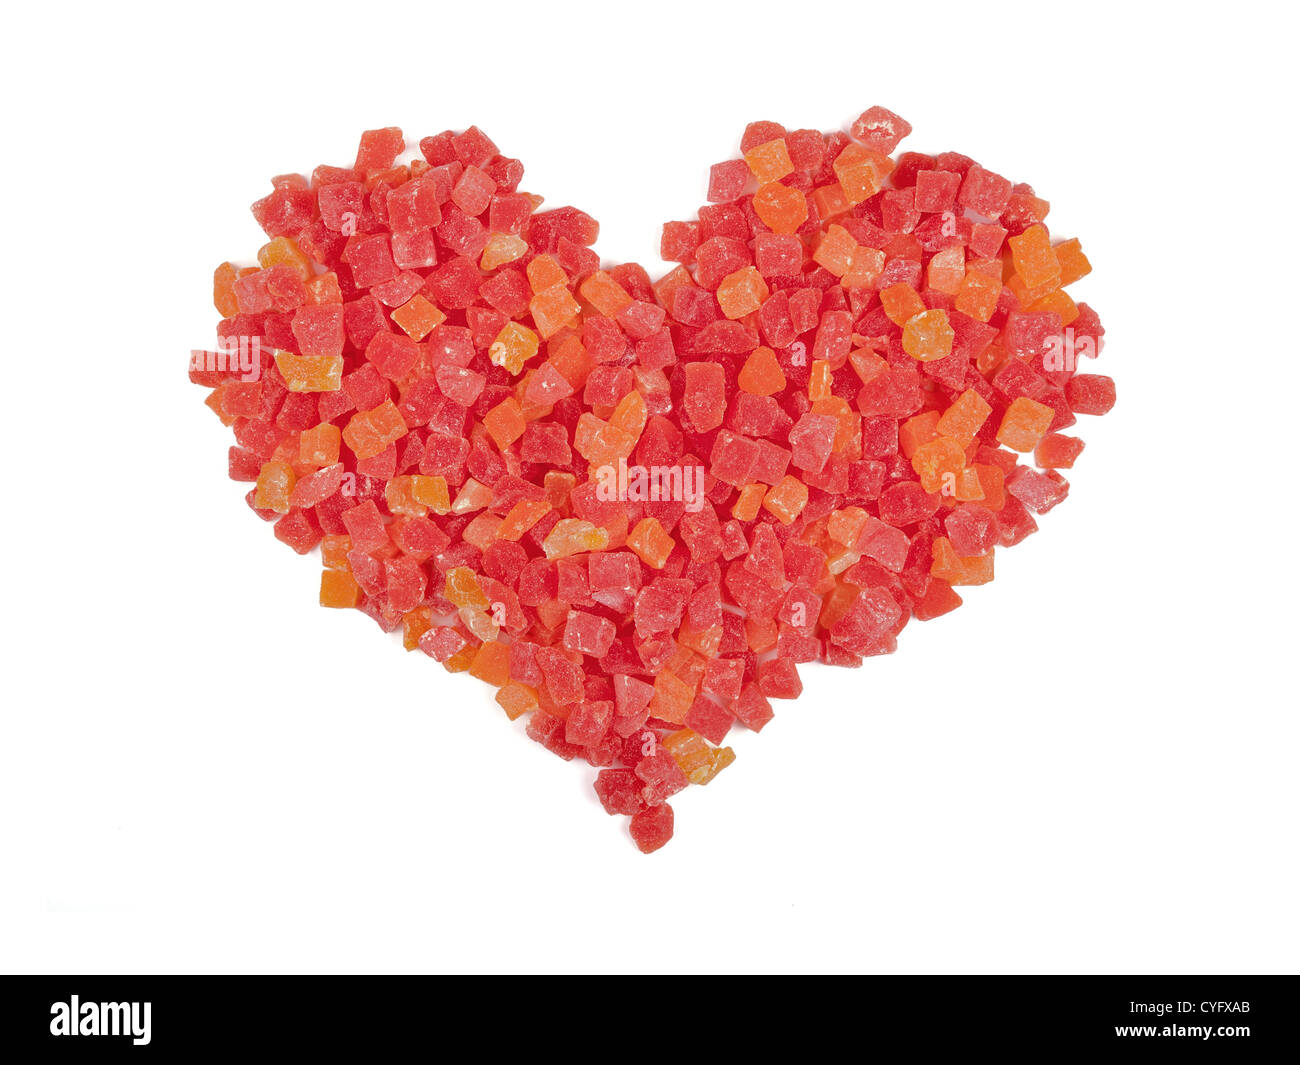 Red heart, composed of sweet candied fruit Stock Photo